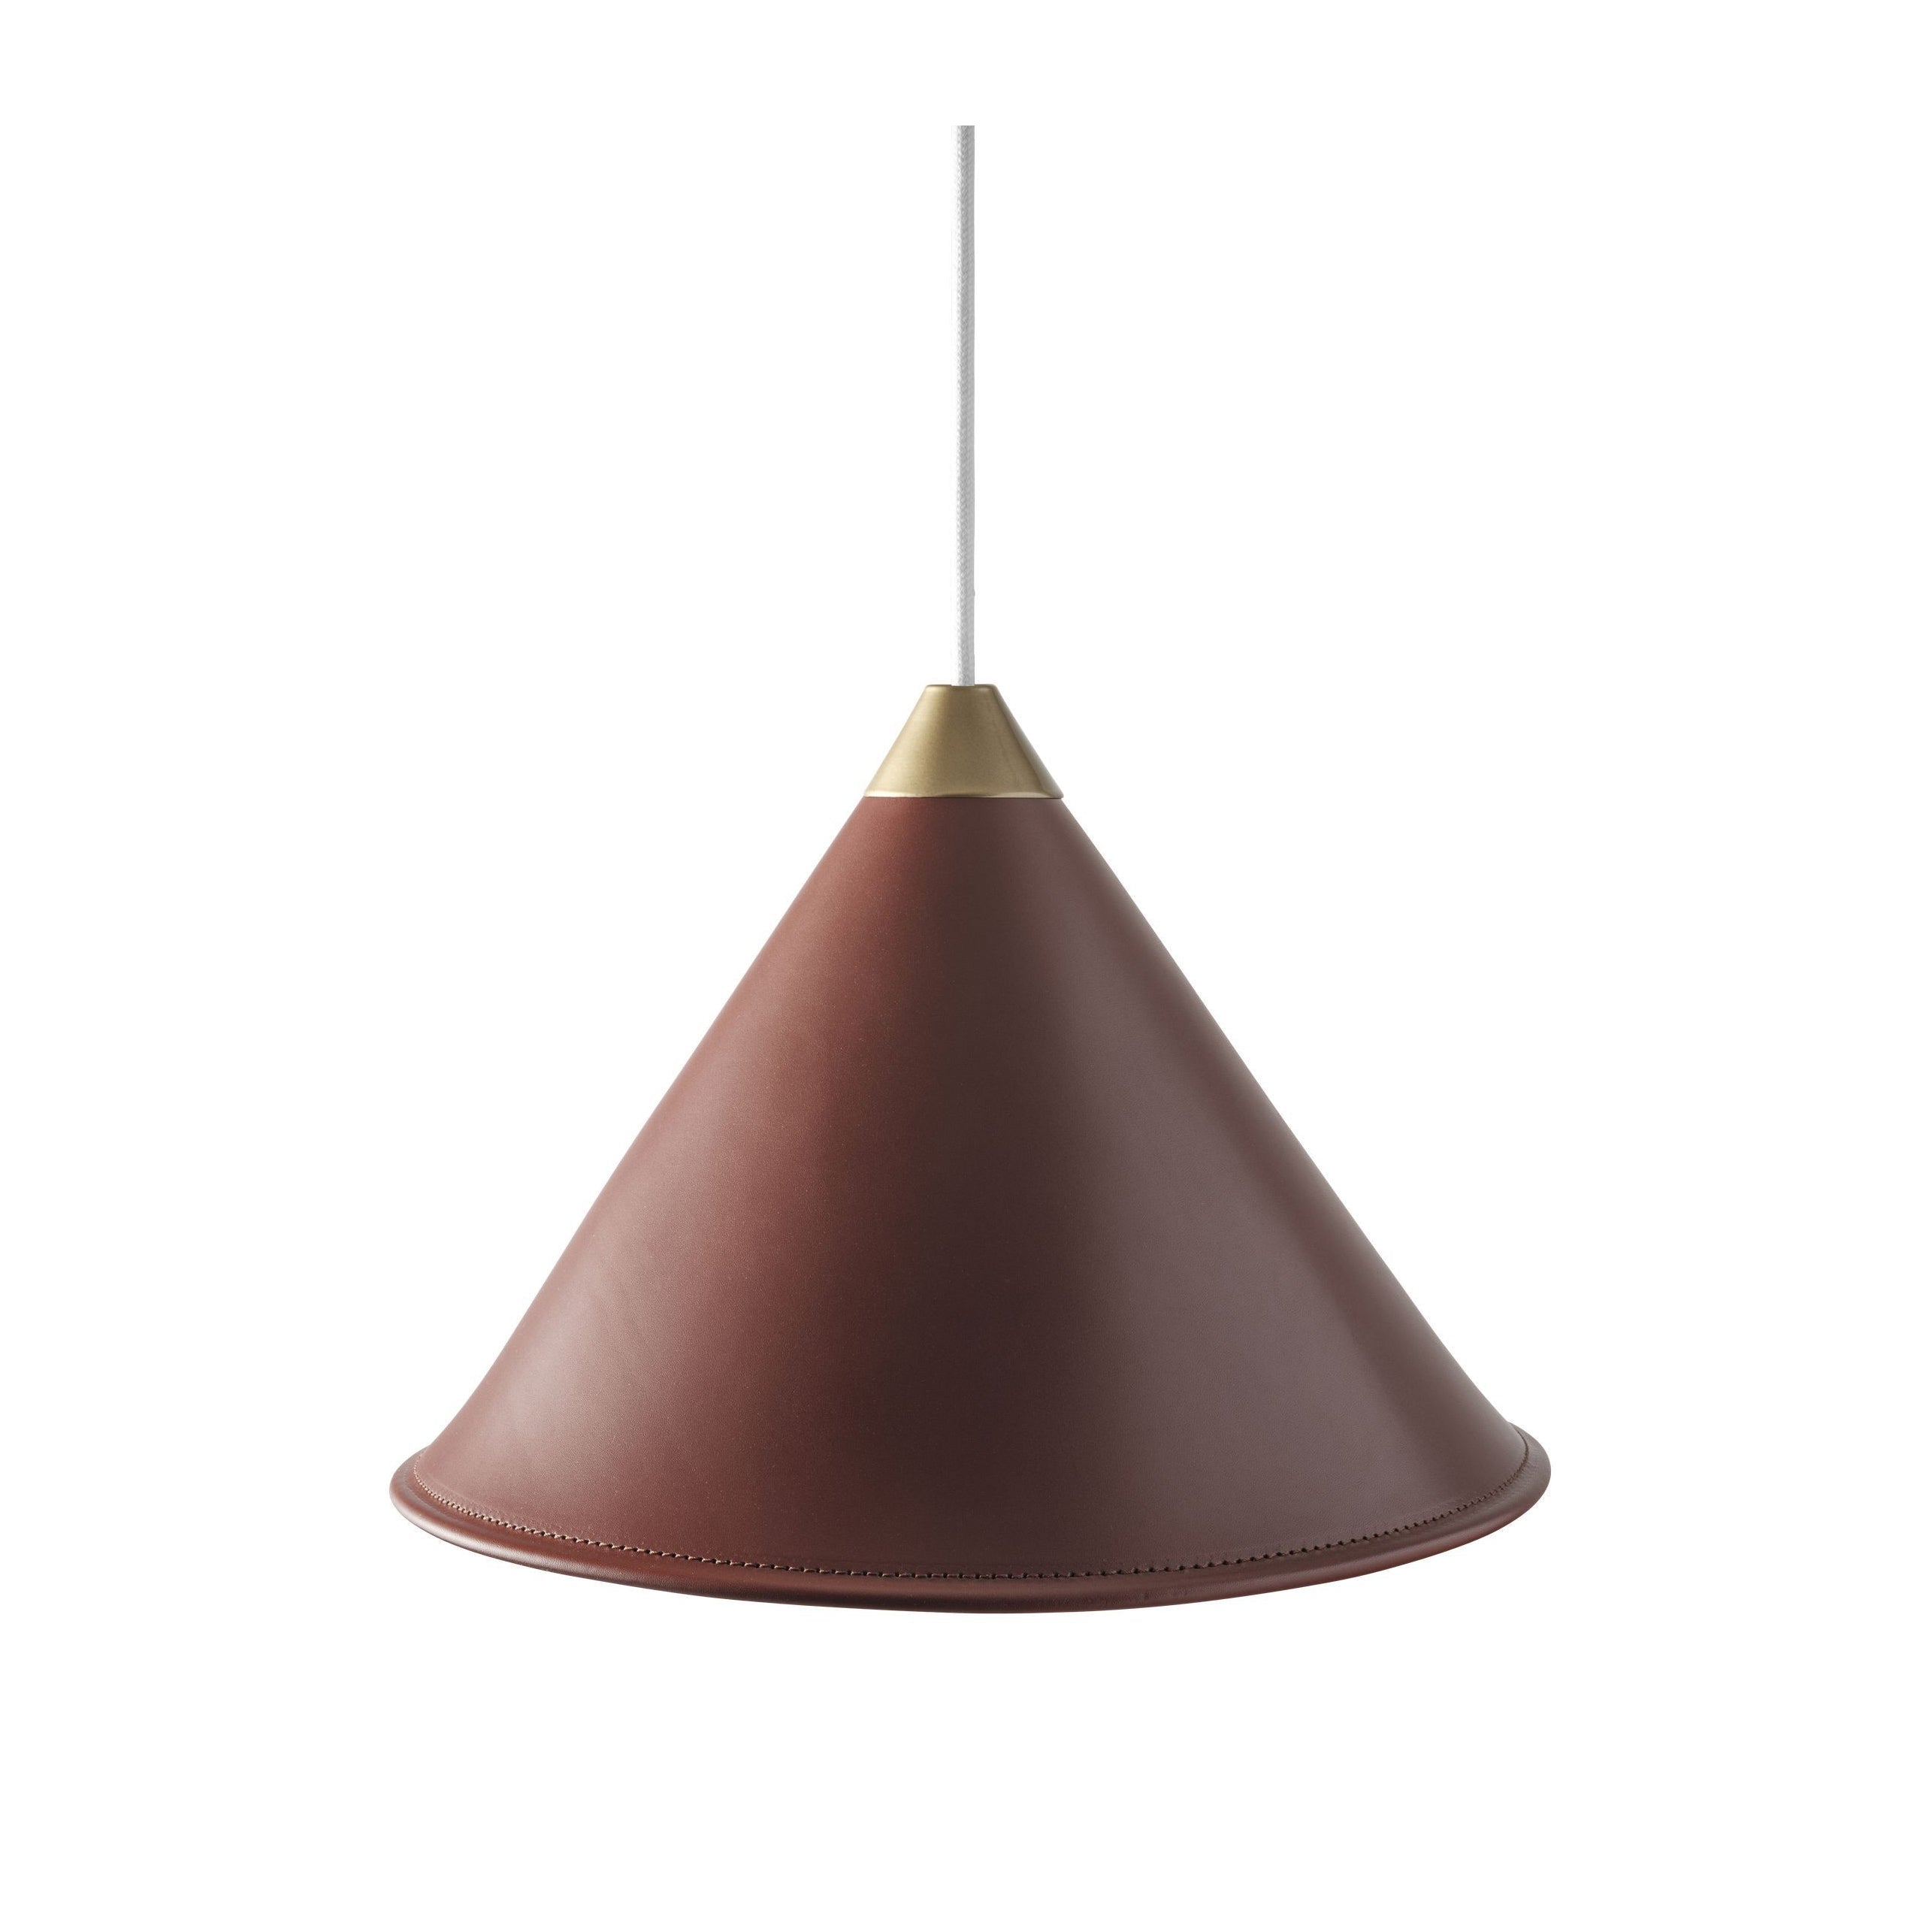 Cuero Namibia Pendant ø 25 Cm, Oak Brown/Brass With White Cable